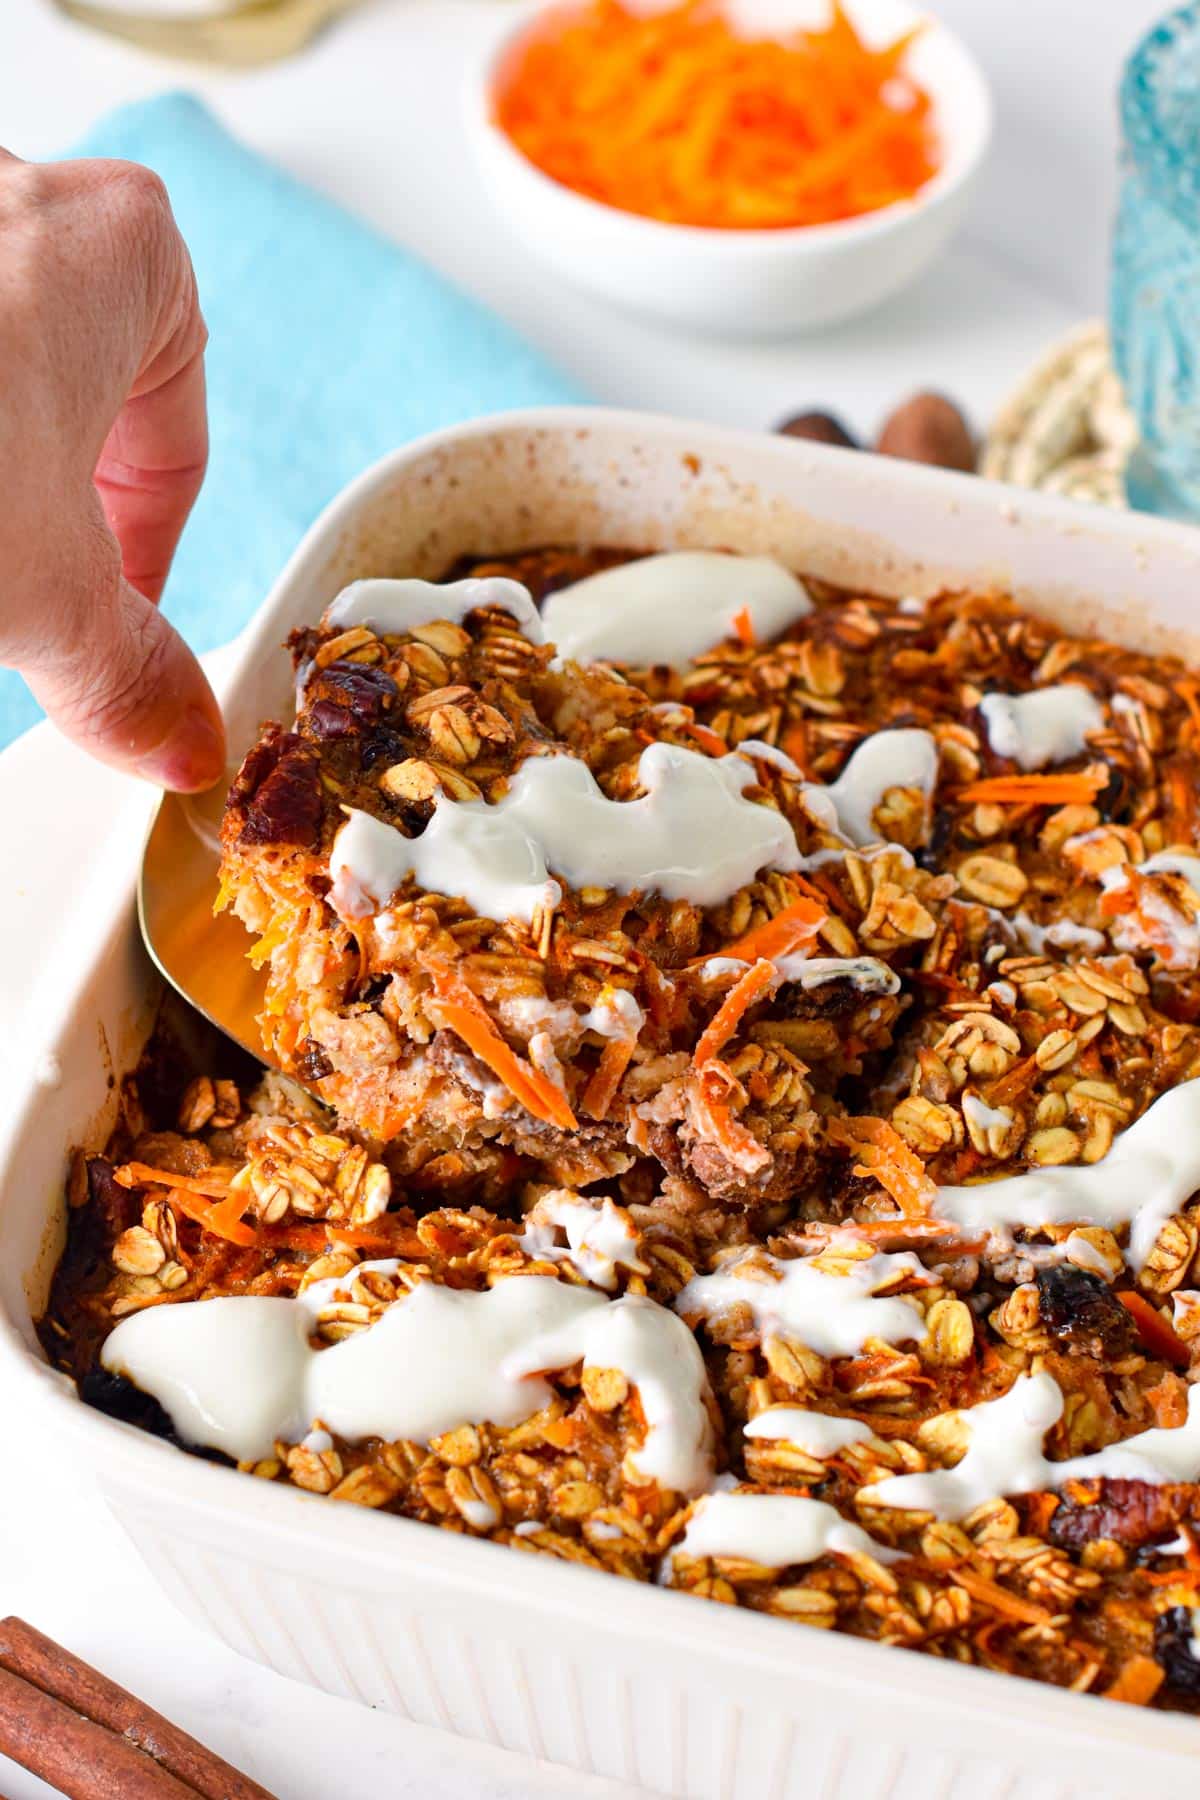 This Carrot Cake Baked Oatmeal is an easy one-pan oatmeal to serve a delicious carrot-cake flavor oatmeal to all the family. It's the easiest healthy breakfast this Easter for carrot cake lovers.